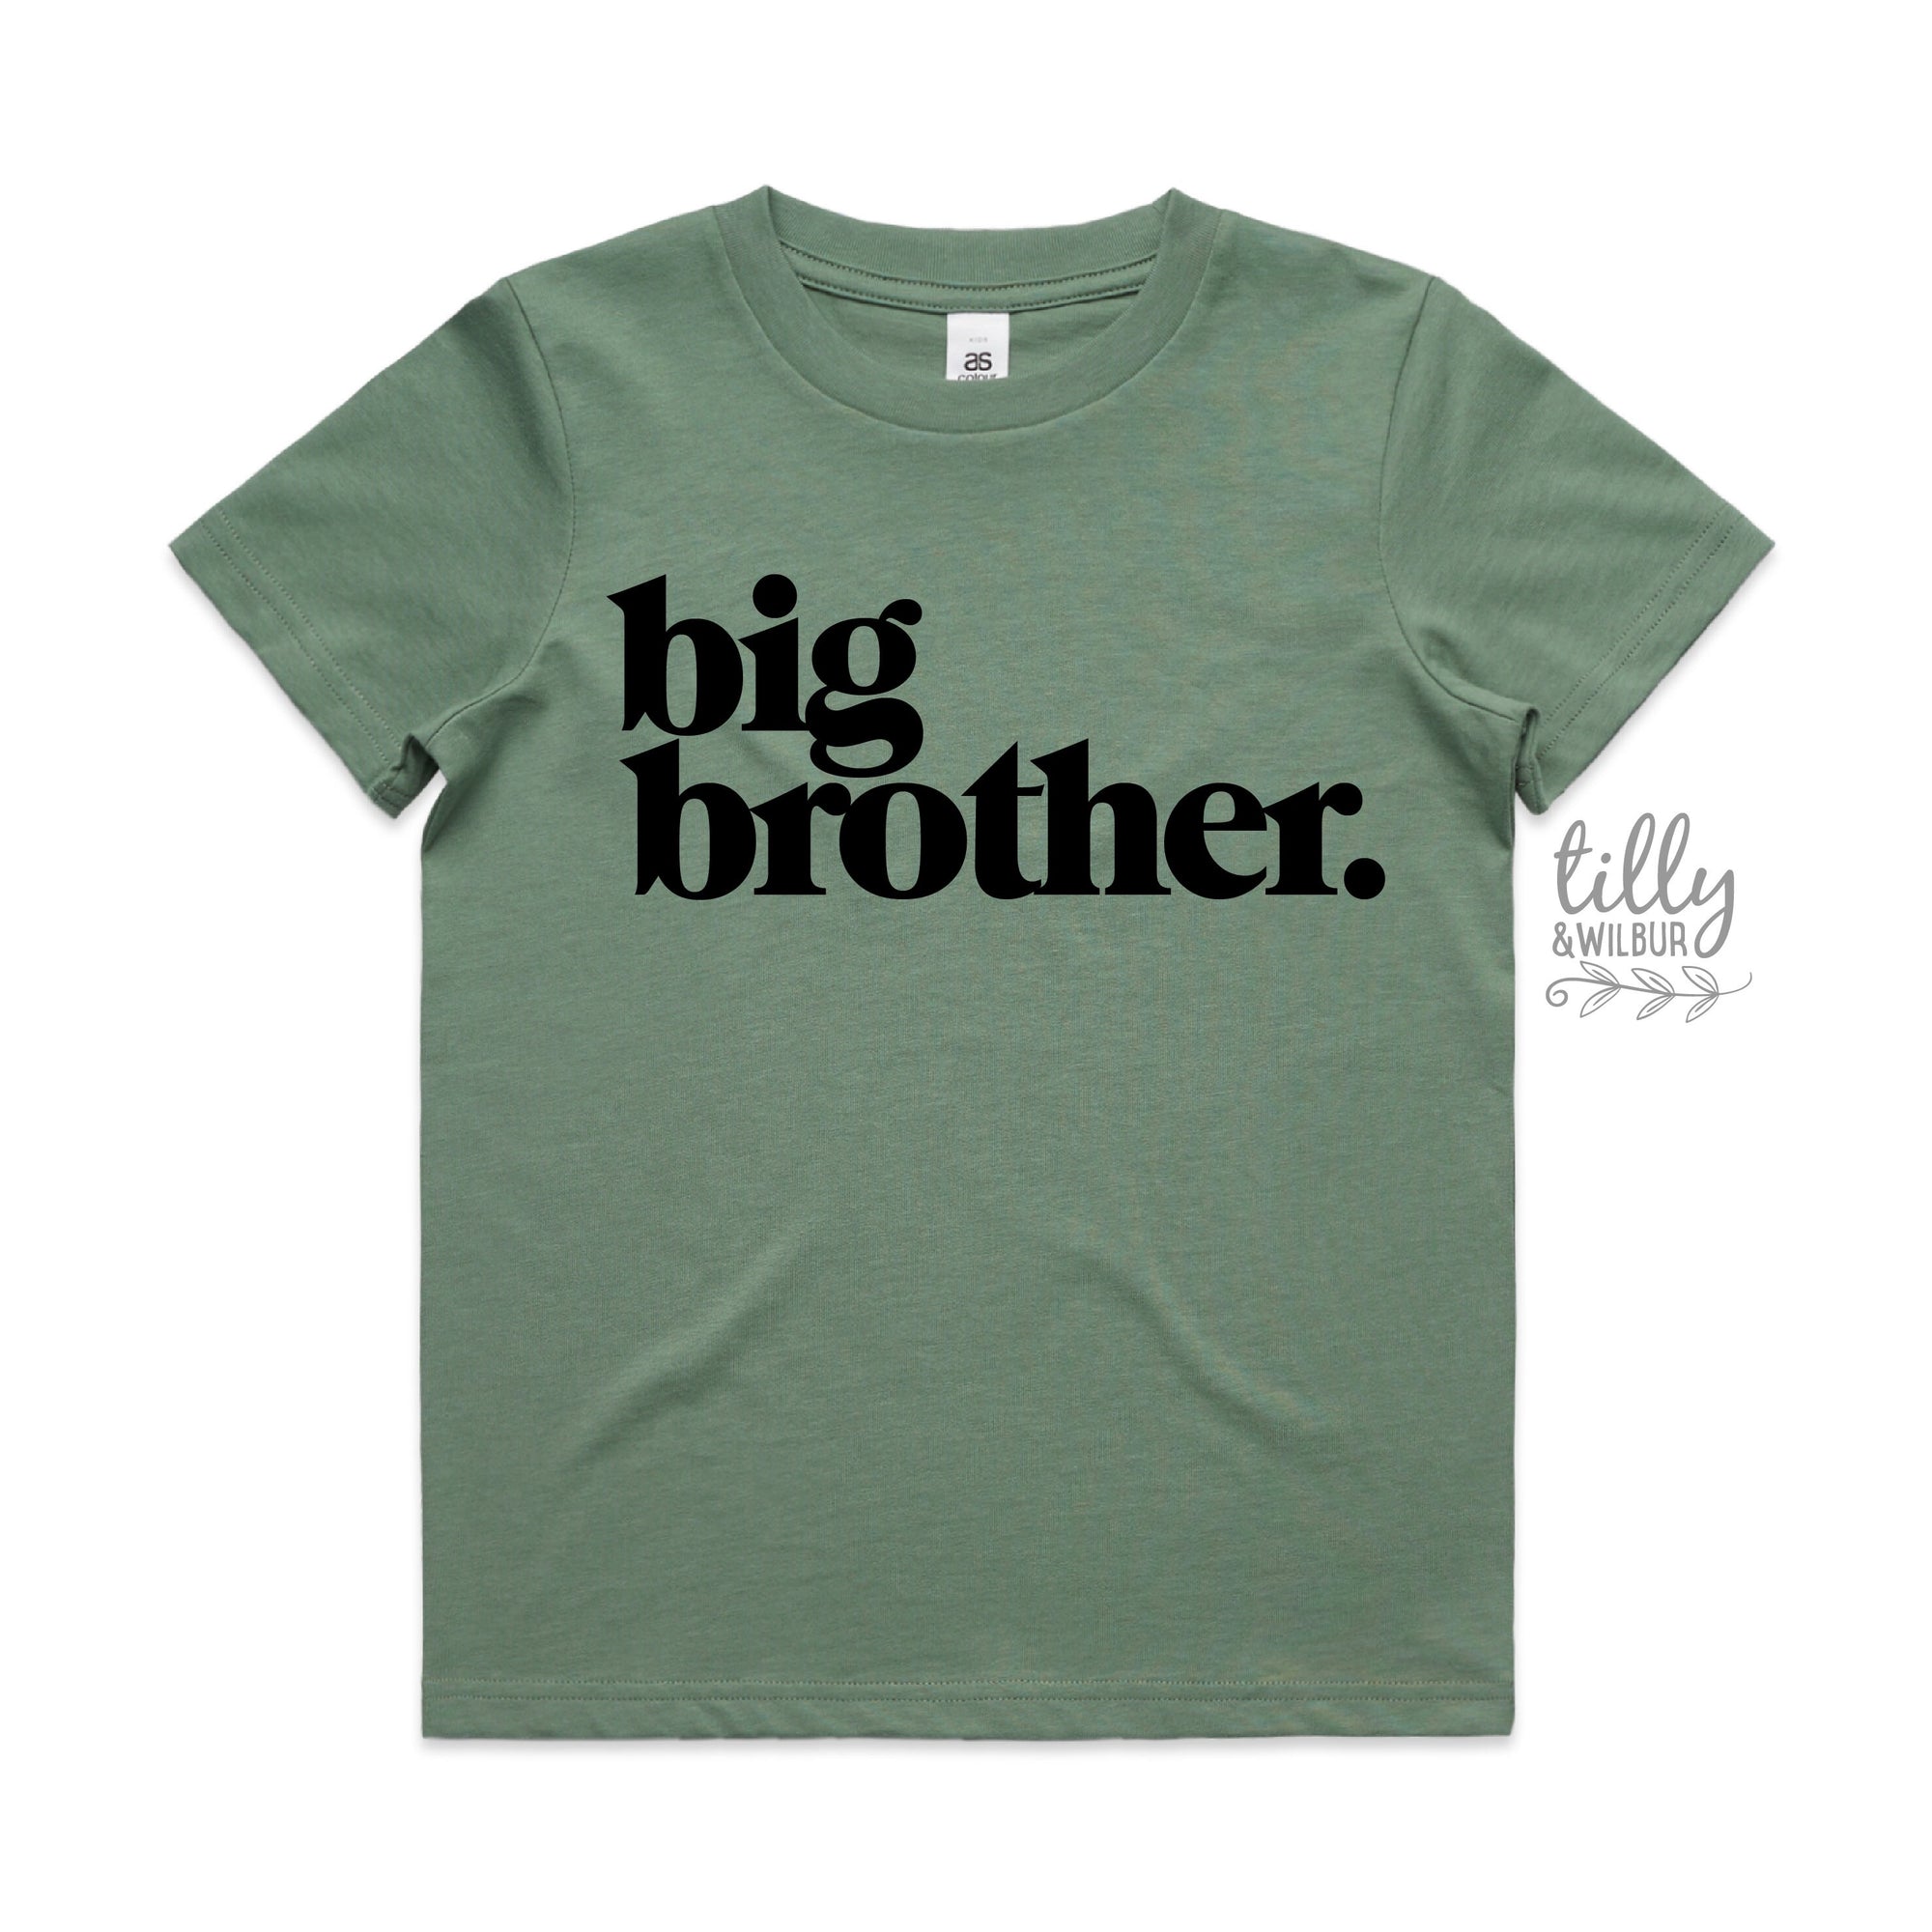 Big Brother T-Shirt, Pregnancy Announcement T-Shirt, Big Bro Shirt, I'm Going To Be A Big Brother, Big Brother Gift, Promoted To Big Brother